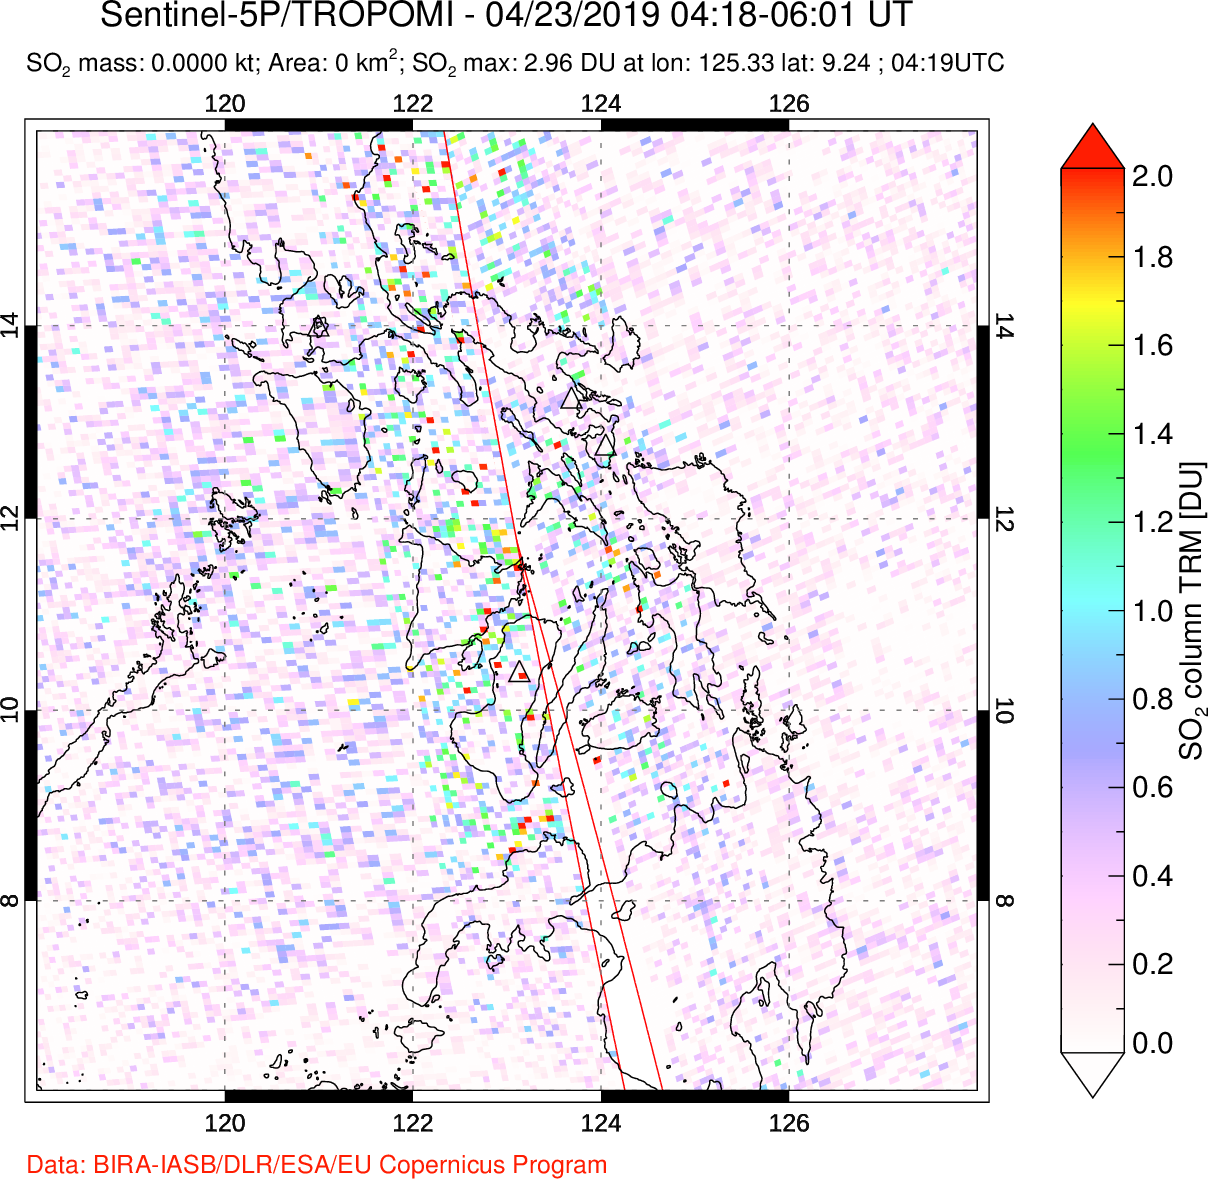 A sulfur dioxide image over Philippines on Apr 23, 2019.